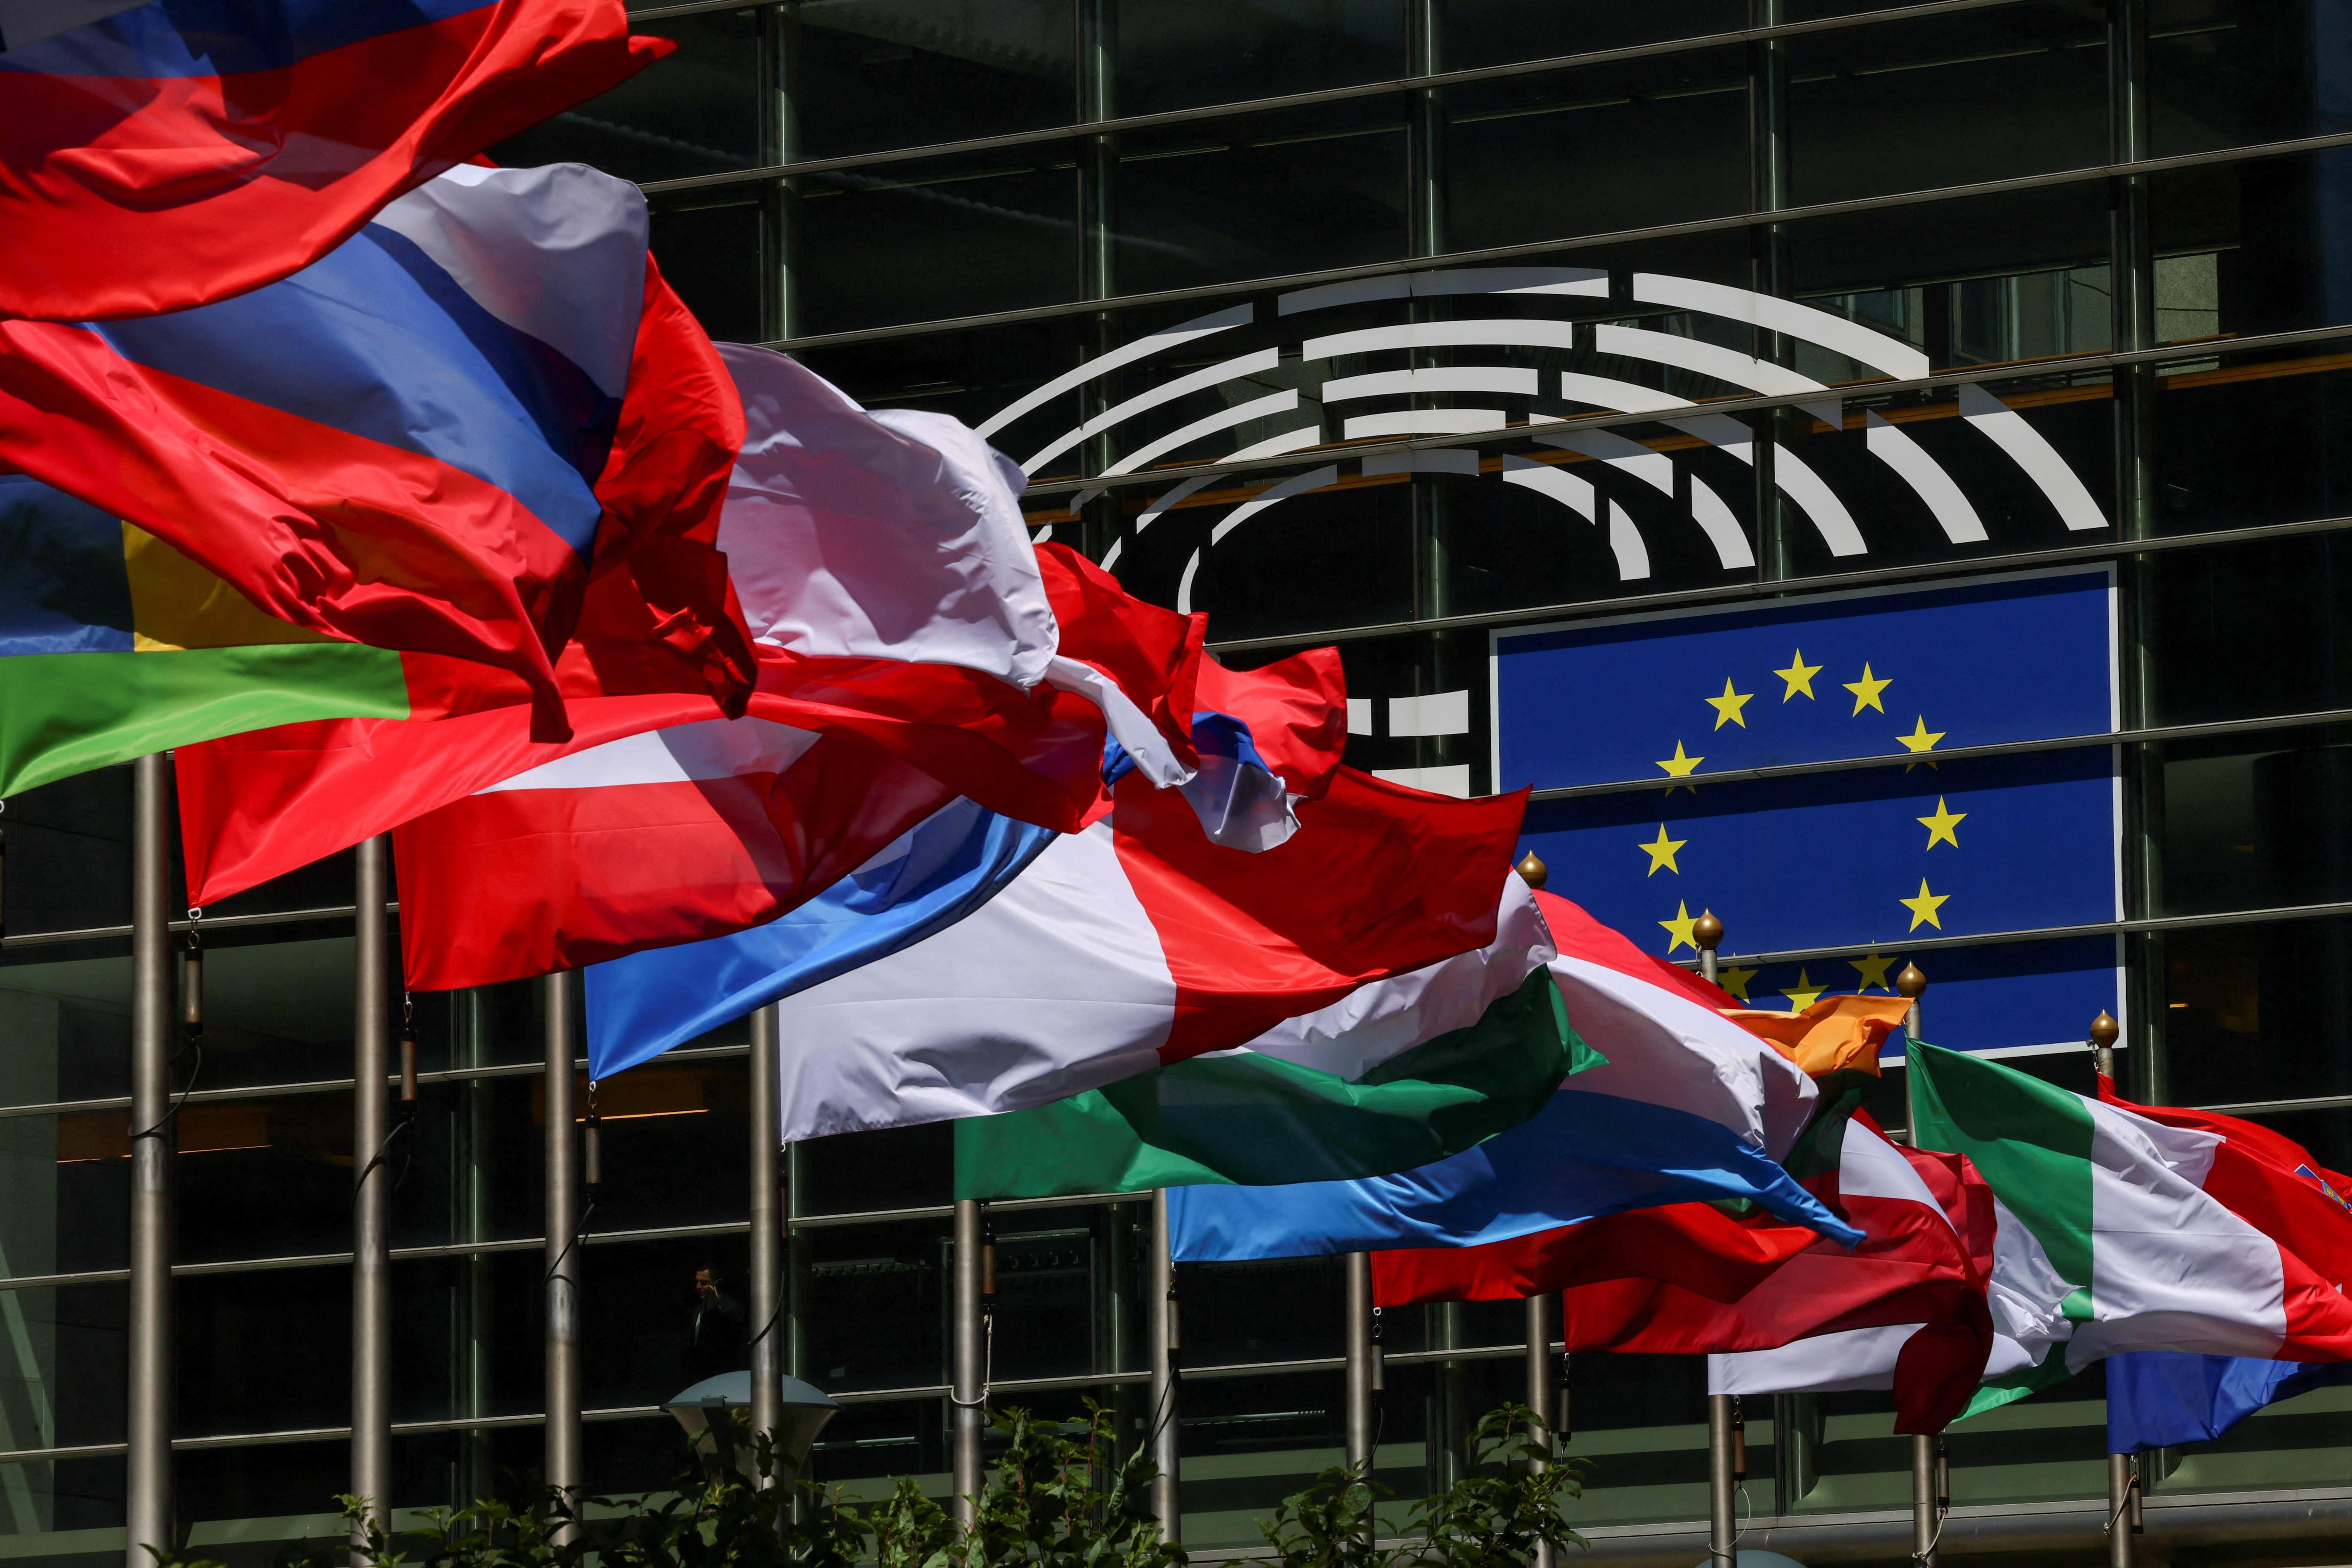 Flags flutter outside the European Parliament in Brussels